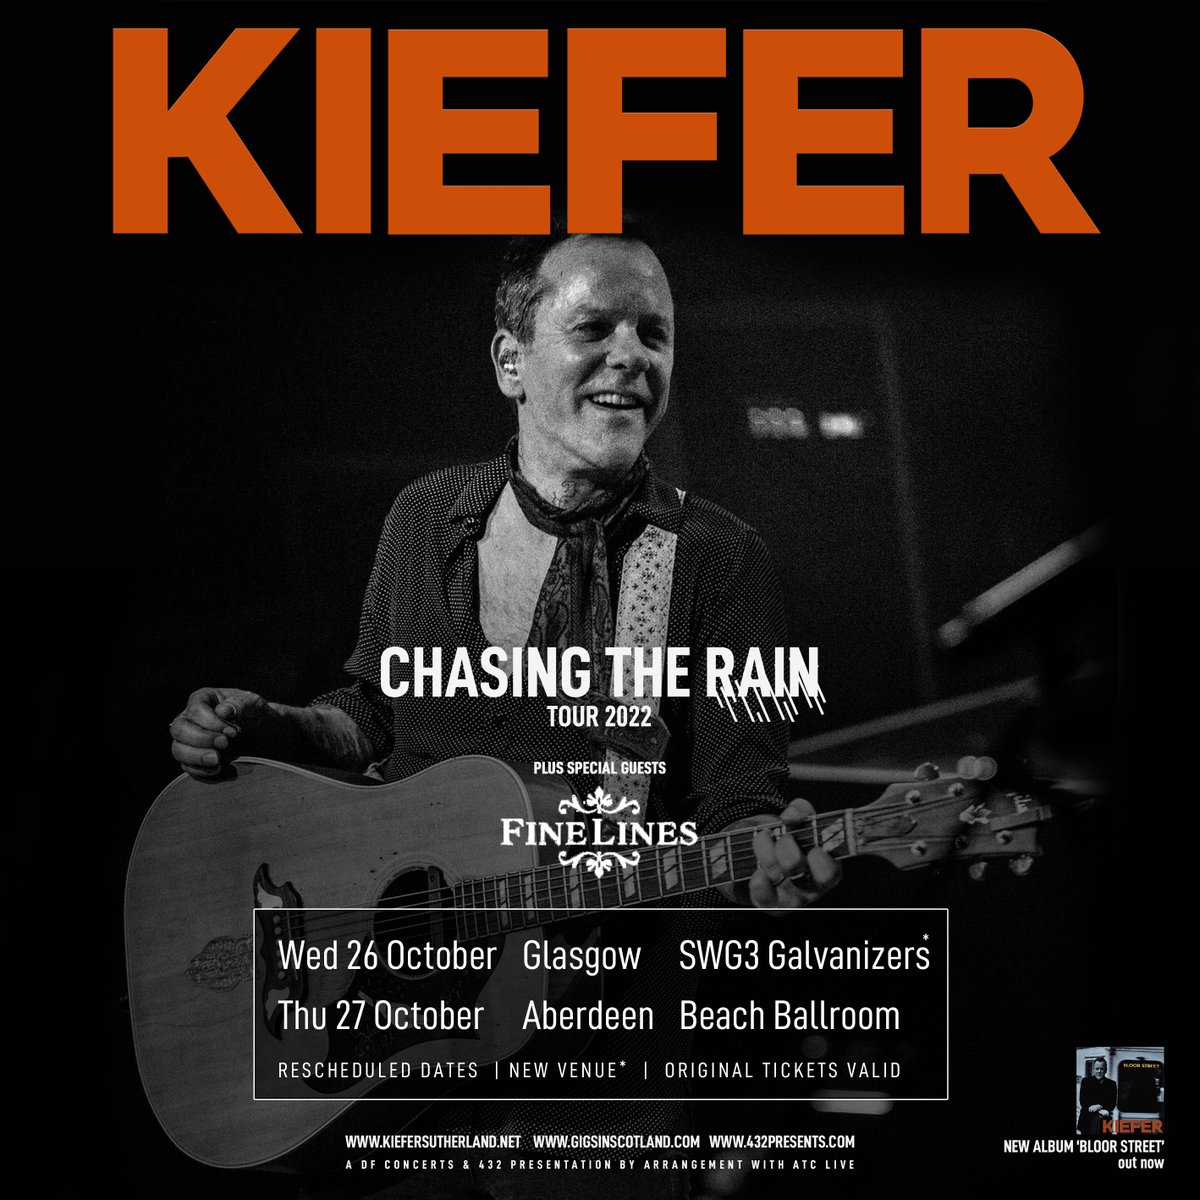 .@RealKiefer's Chasing The Rain tour comes to @SWG3glasgow and @beachballroom this week, with special guests @wearefinelines. Final tickets available here: gigss.co/kiefer-sutherl…